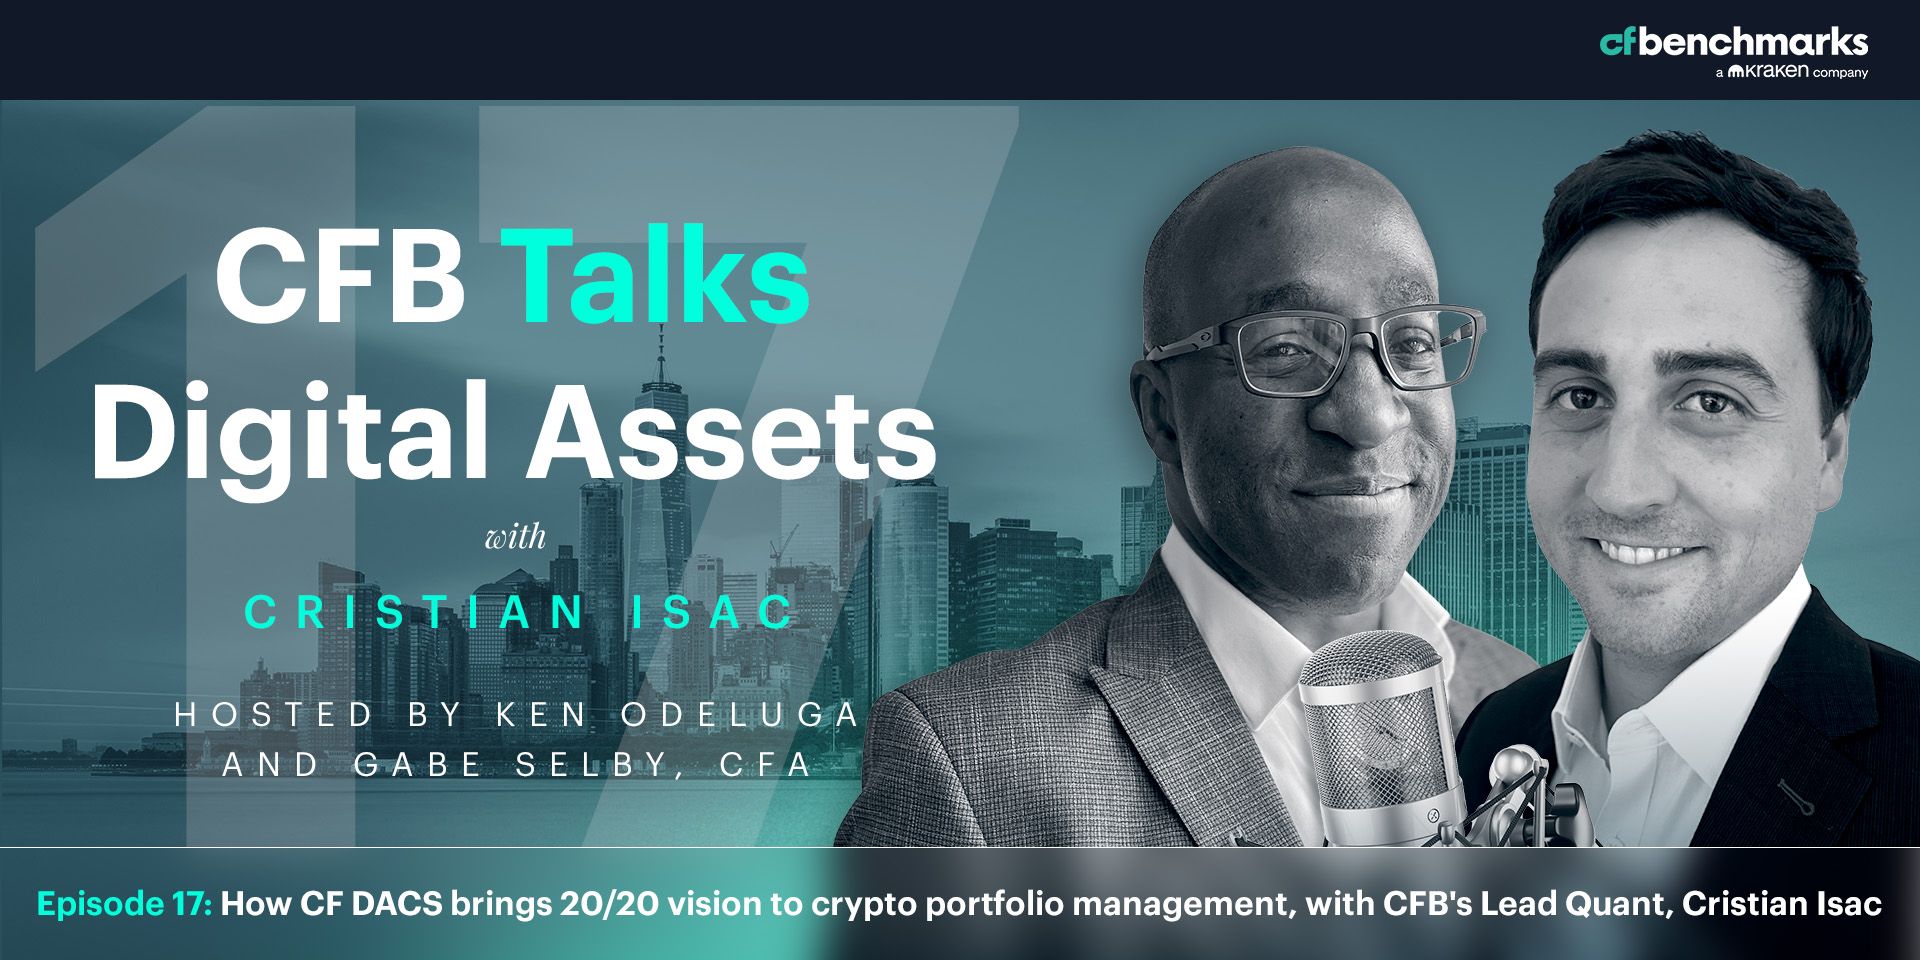 CFB Talks Digital Assets Episode 17: How CF DACS brings 20/20 vision to crypto portfolio management, with Lead Quant Cristian Isac